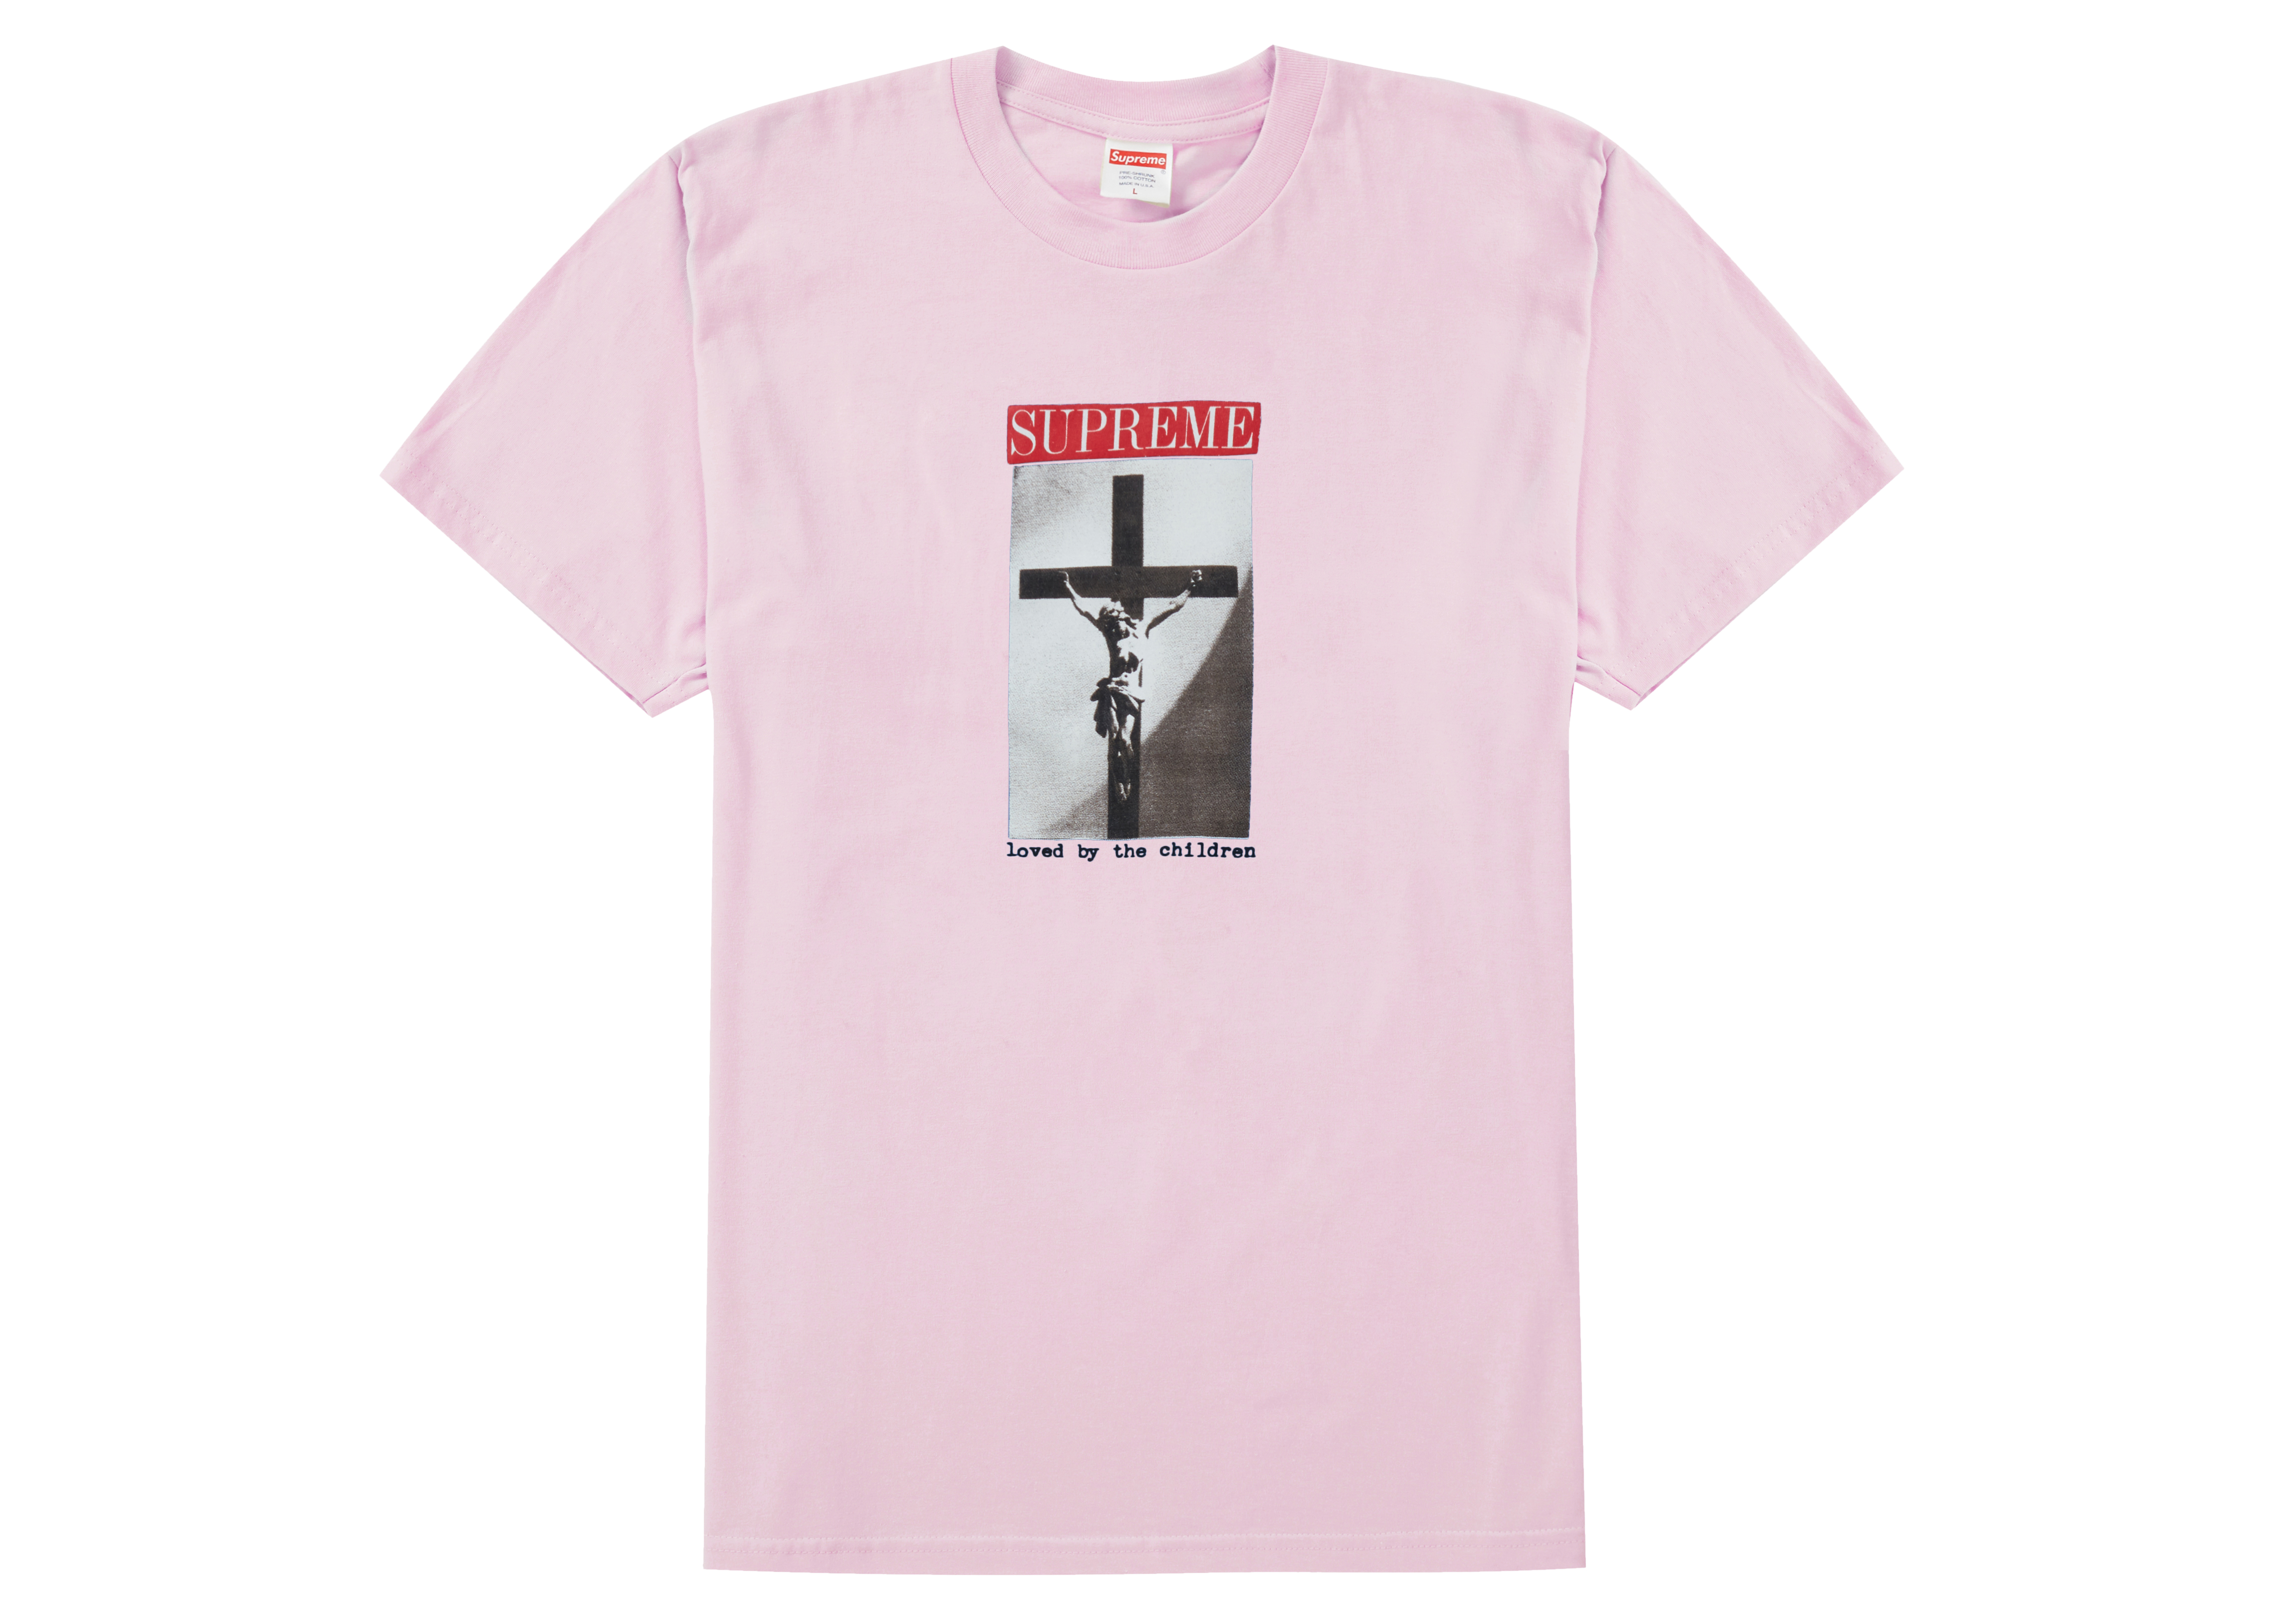 Supreme Loved By The Children Tee Light Pink Men's - SS20 - GB